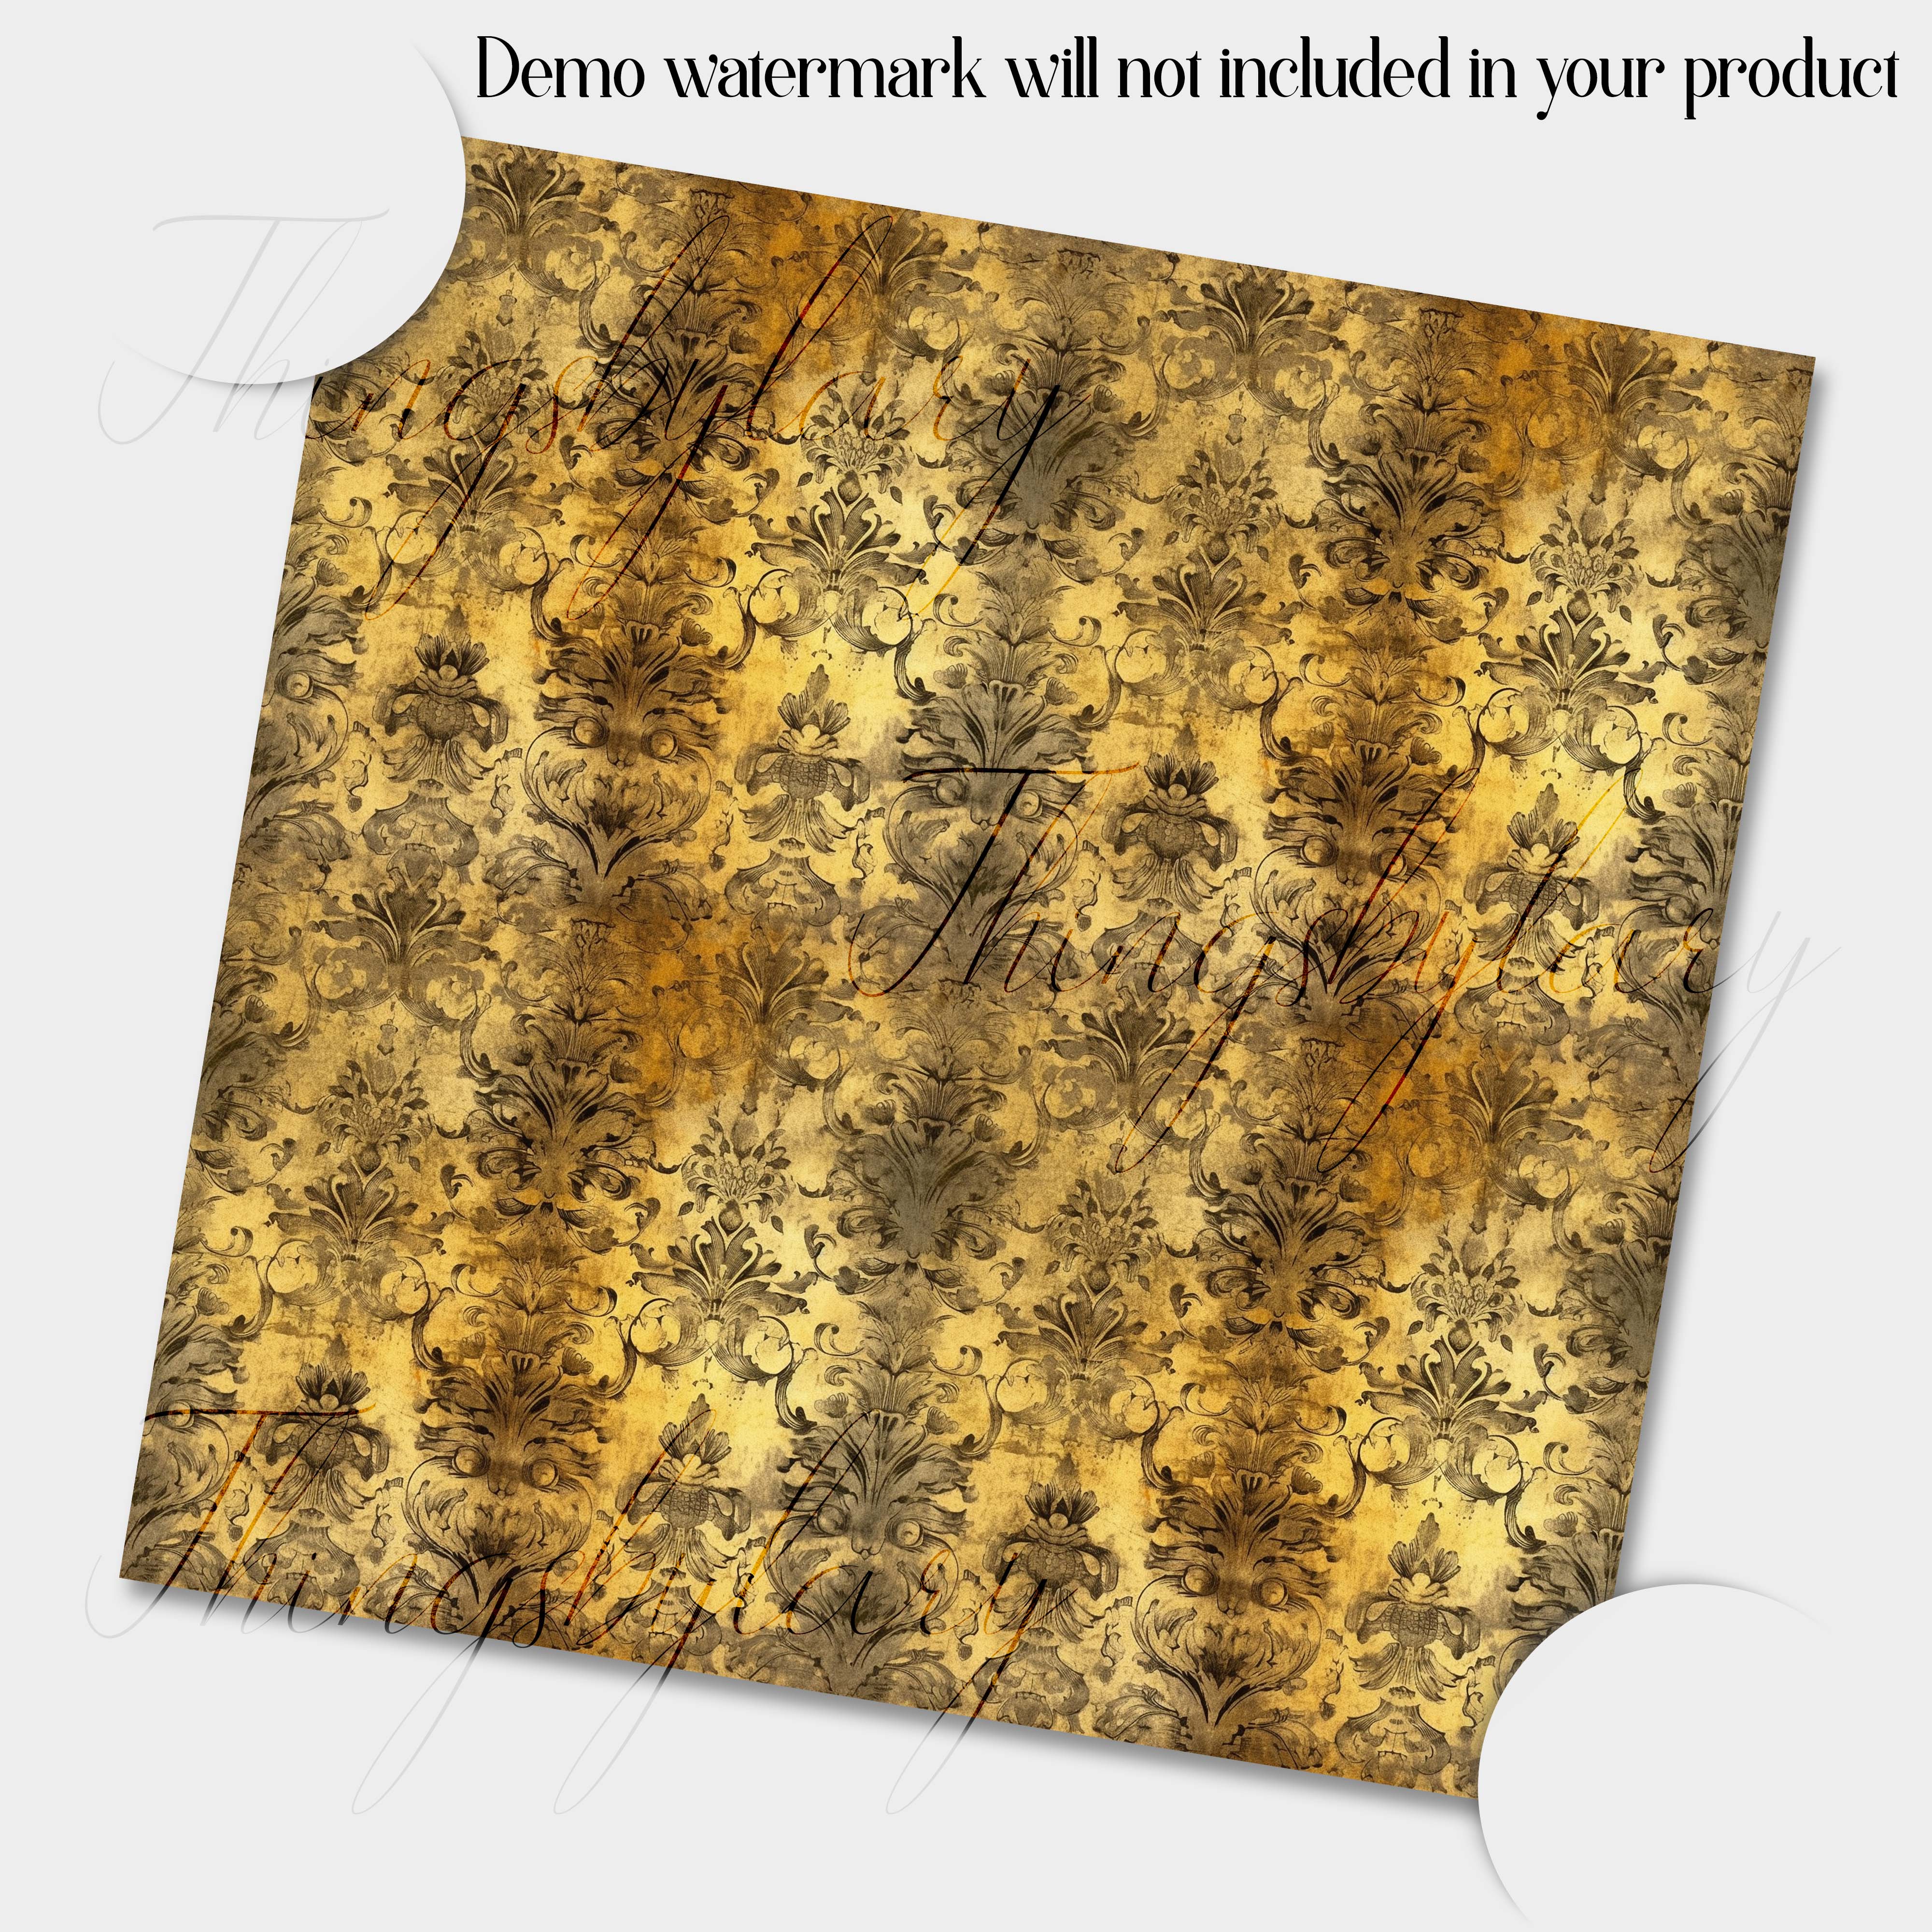 30 Seamless Vintage Gold Faded Damask Royal Victorian Noblesse Digital Papers